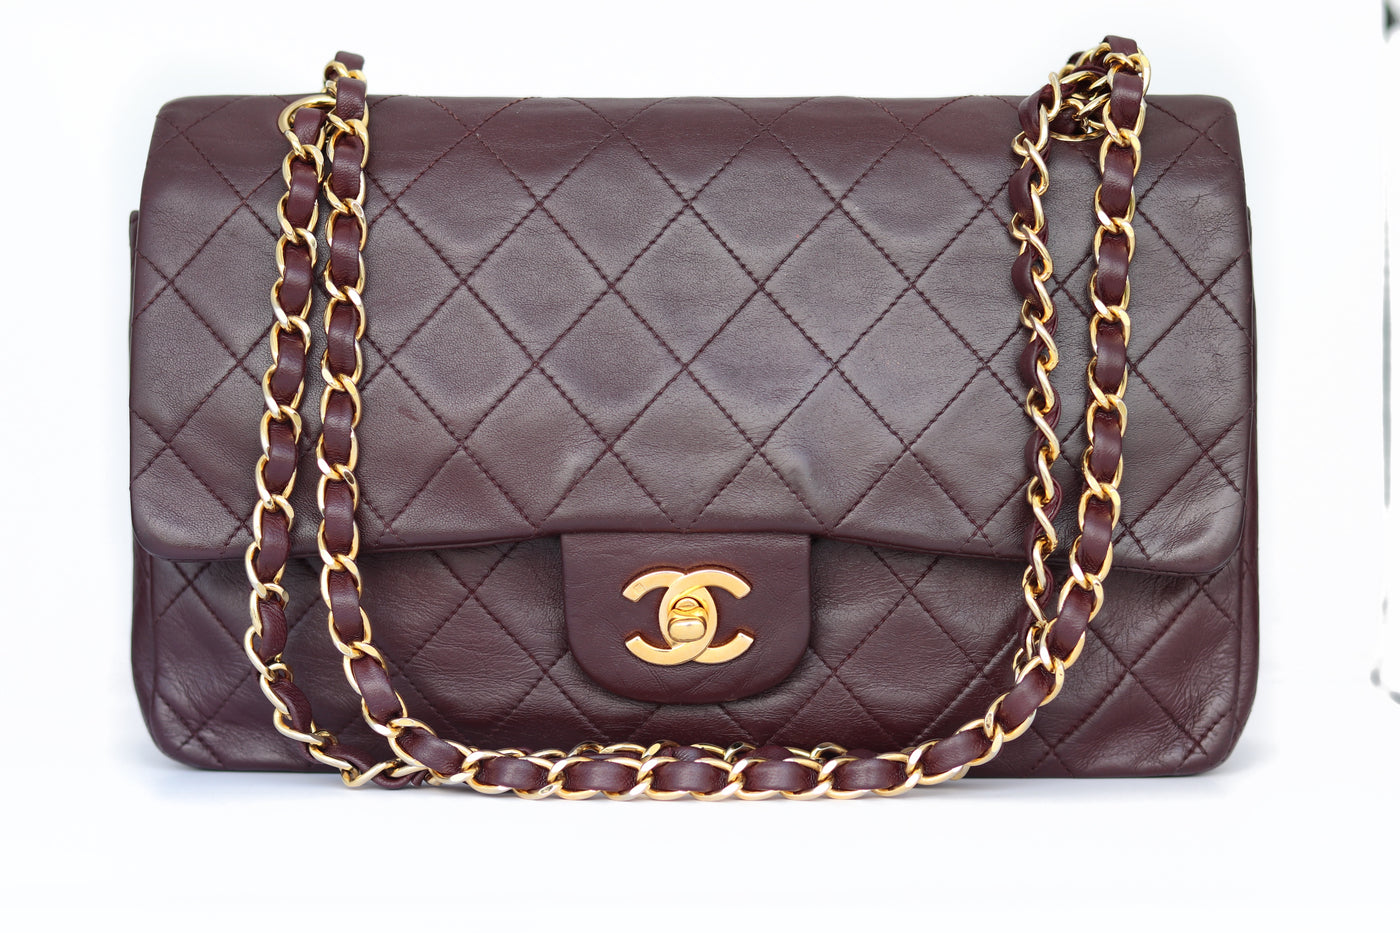 CHANEL 1990 Vintage Classic Double Flap Bag Quilted Lambskin